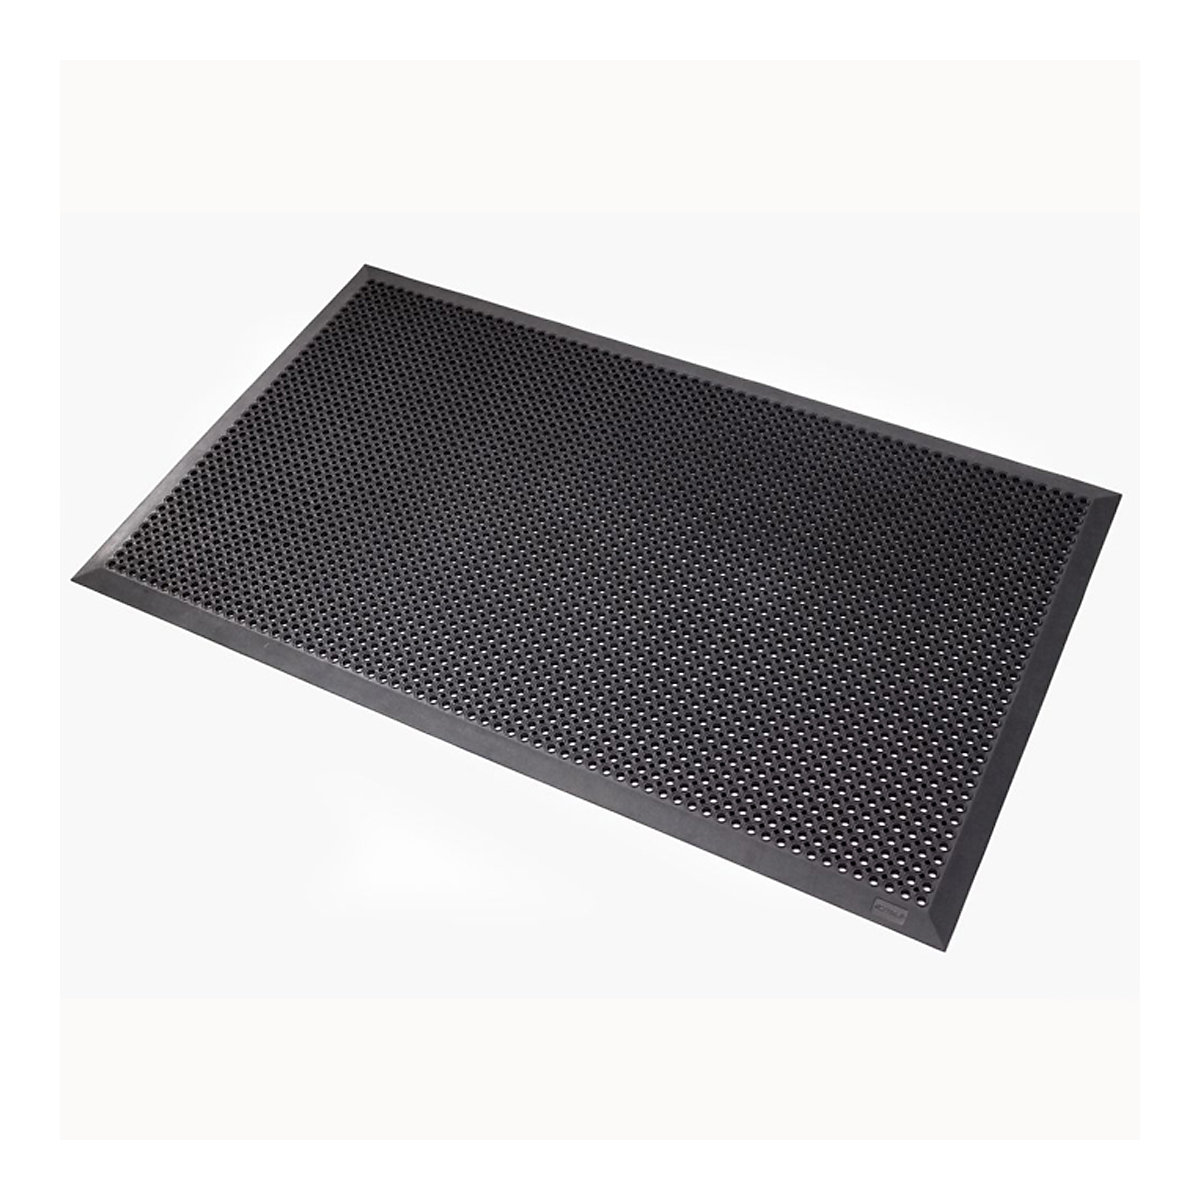 Entrance matting, suitable for wheelchairs – NOTRAX, black, LxW 1800 x 1200 mm-5